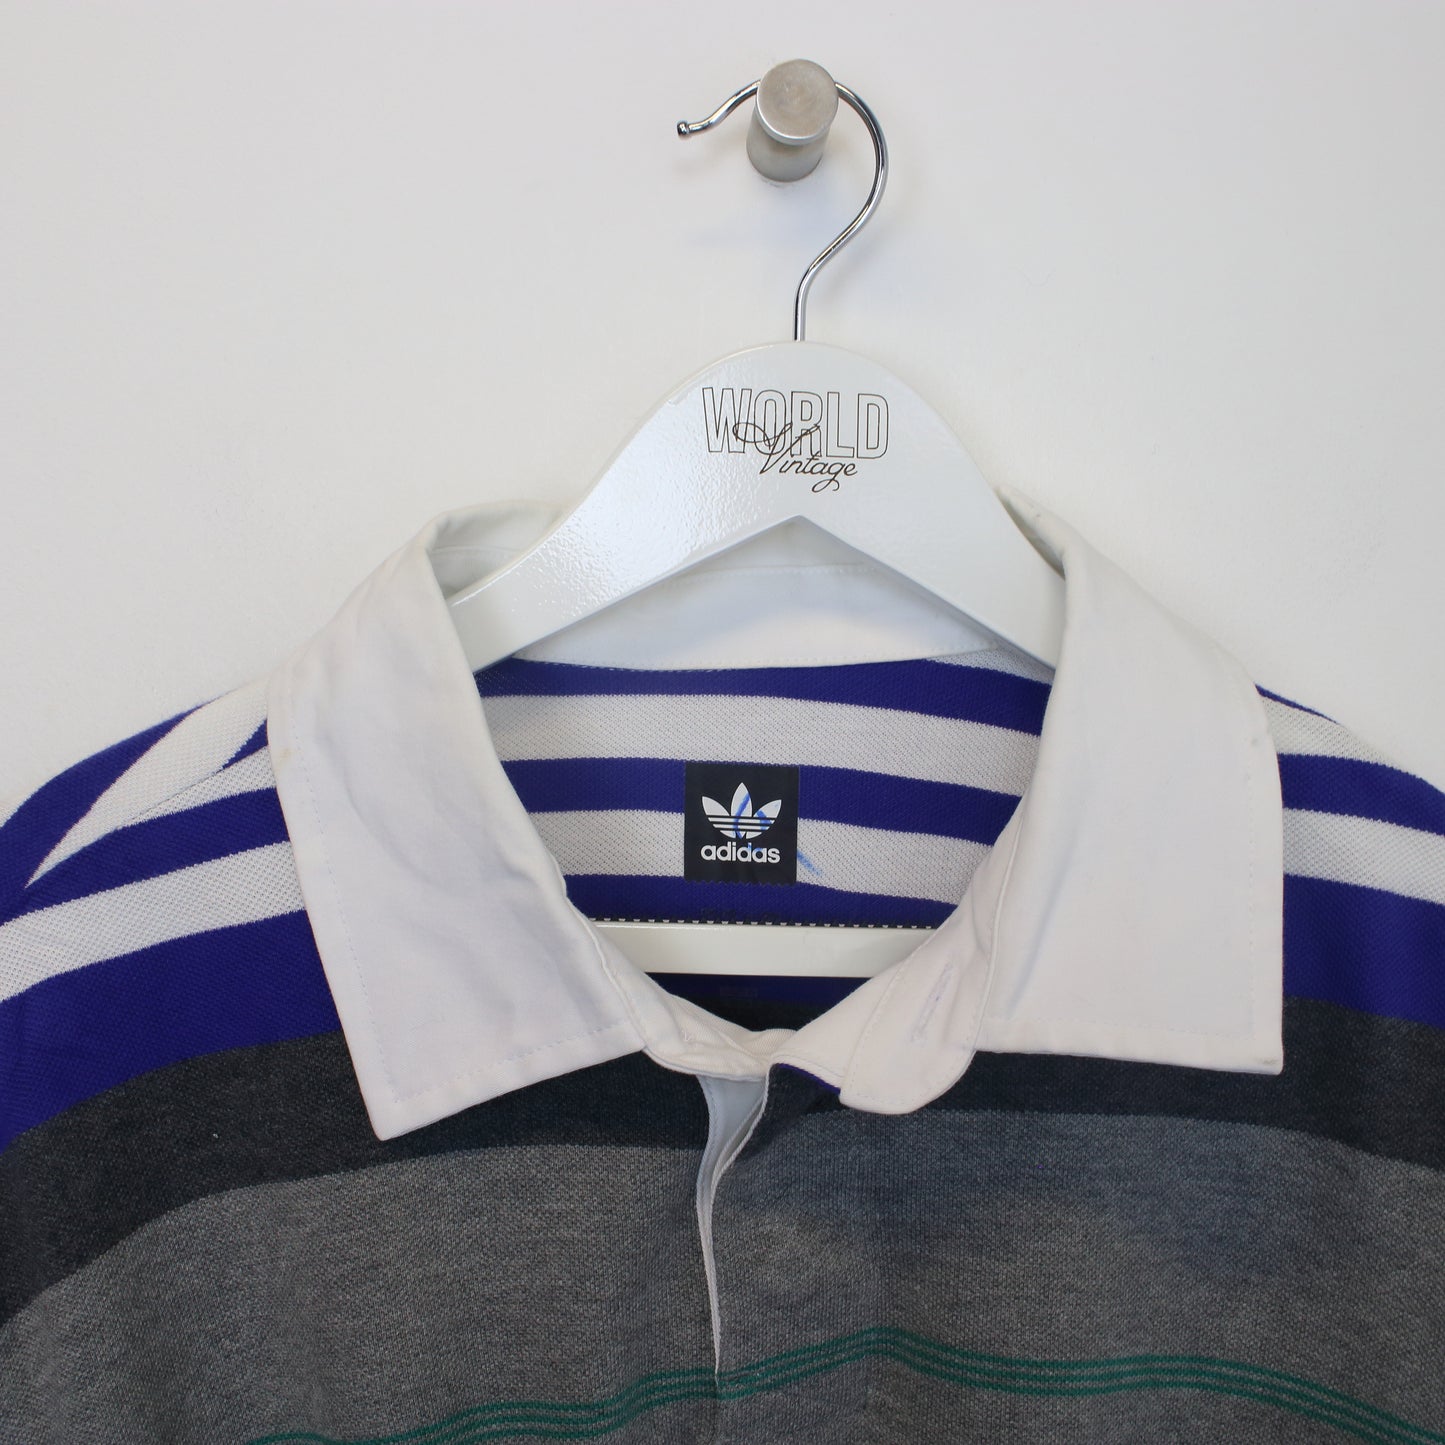 Vintage Adidas rugby shirt in purple and grey. Best fits L